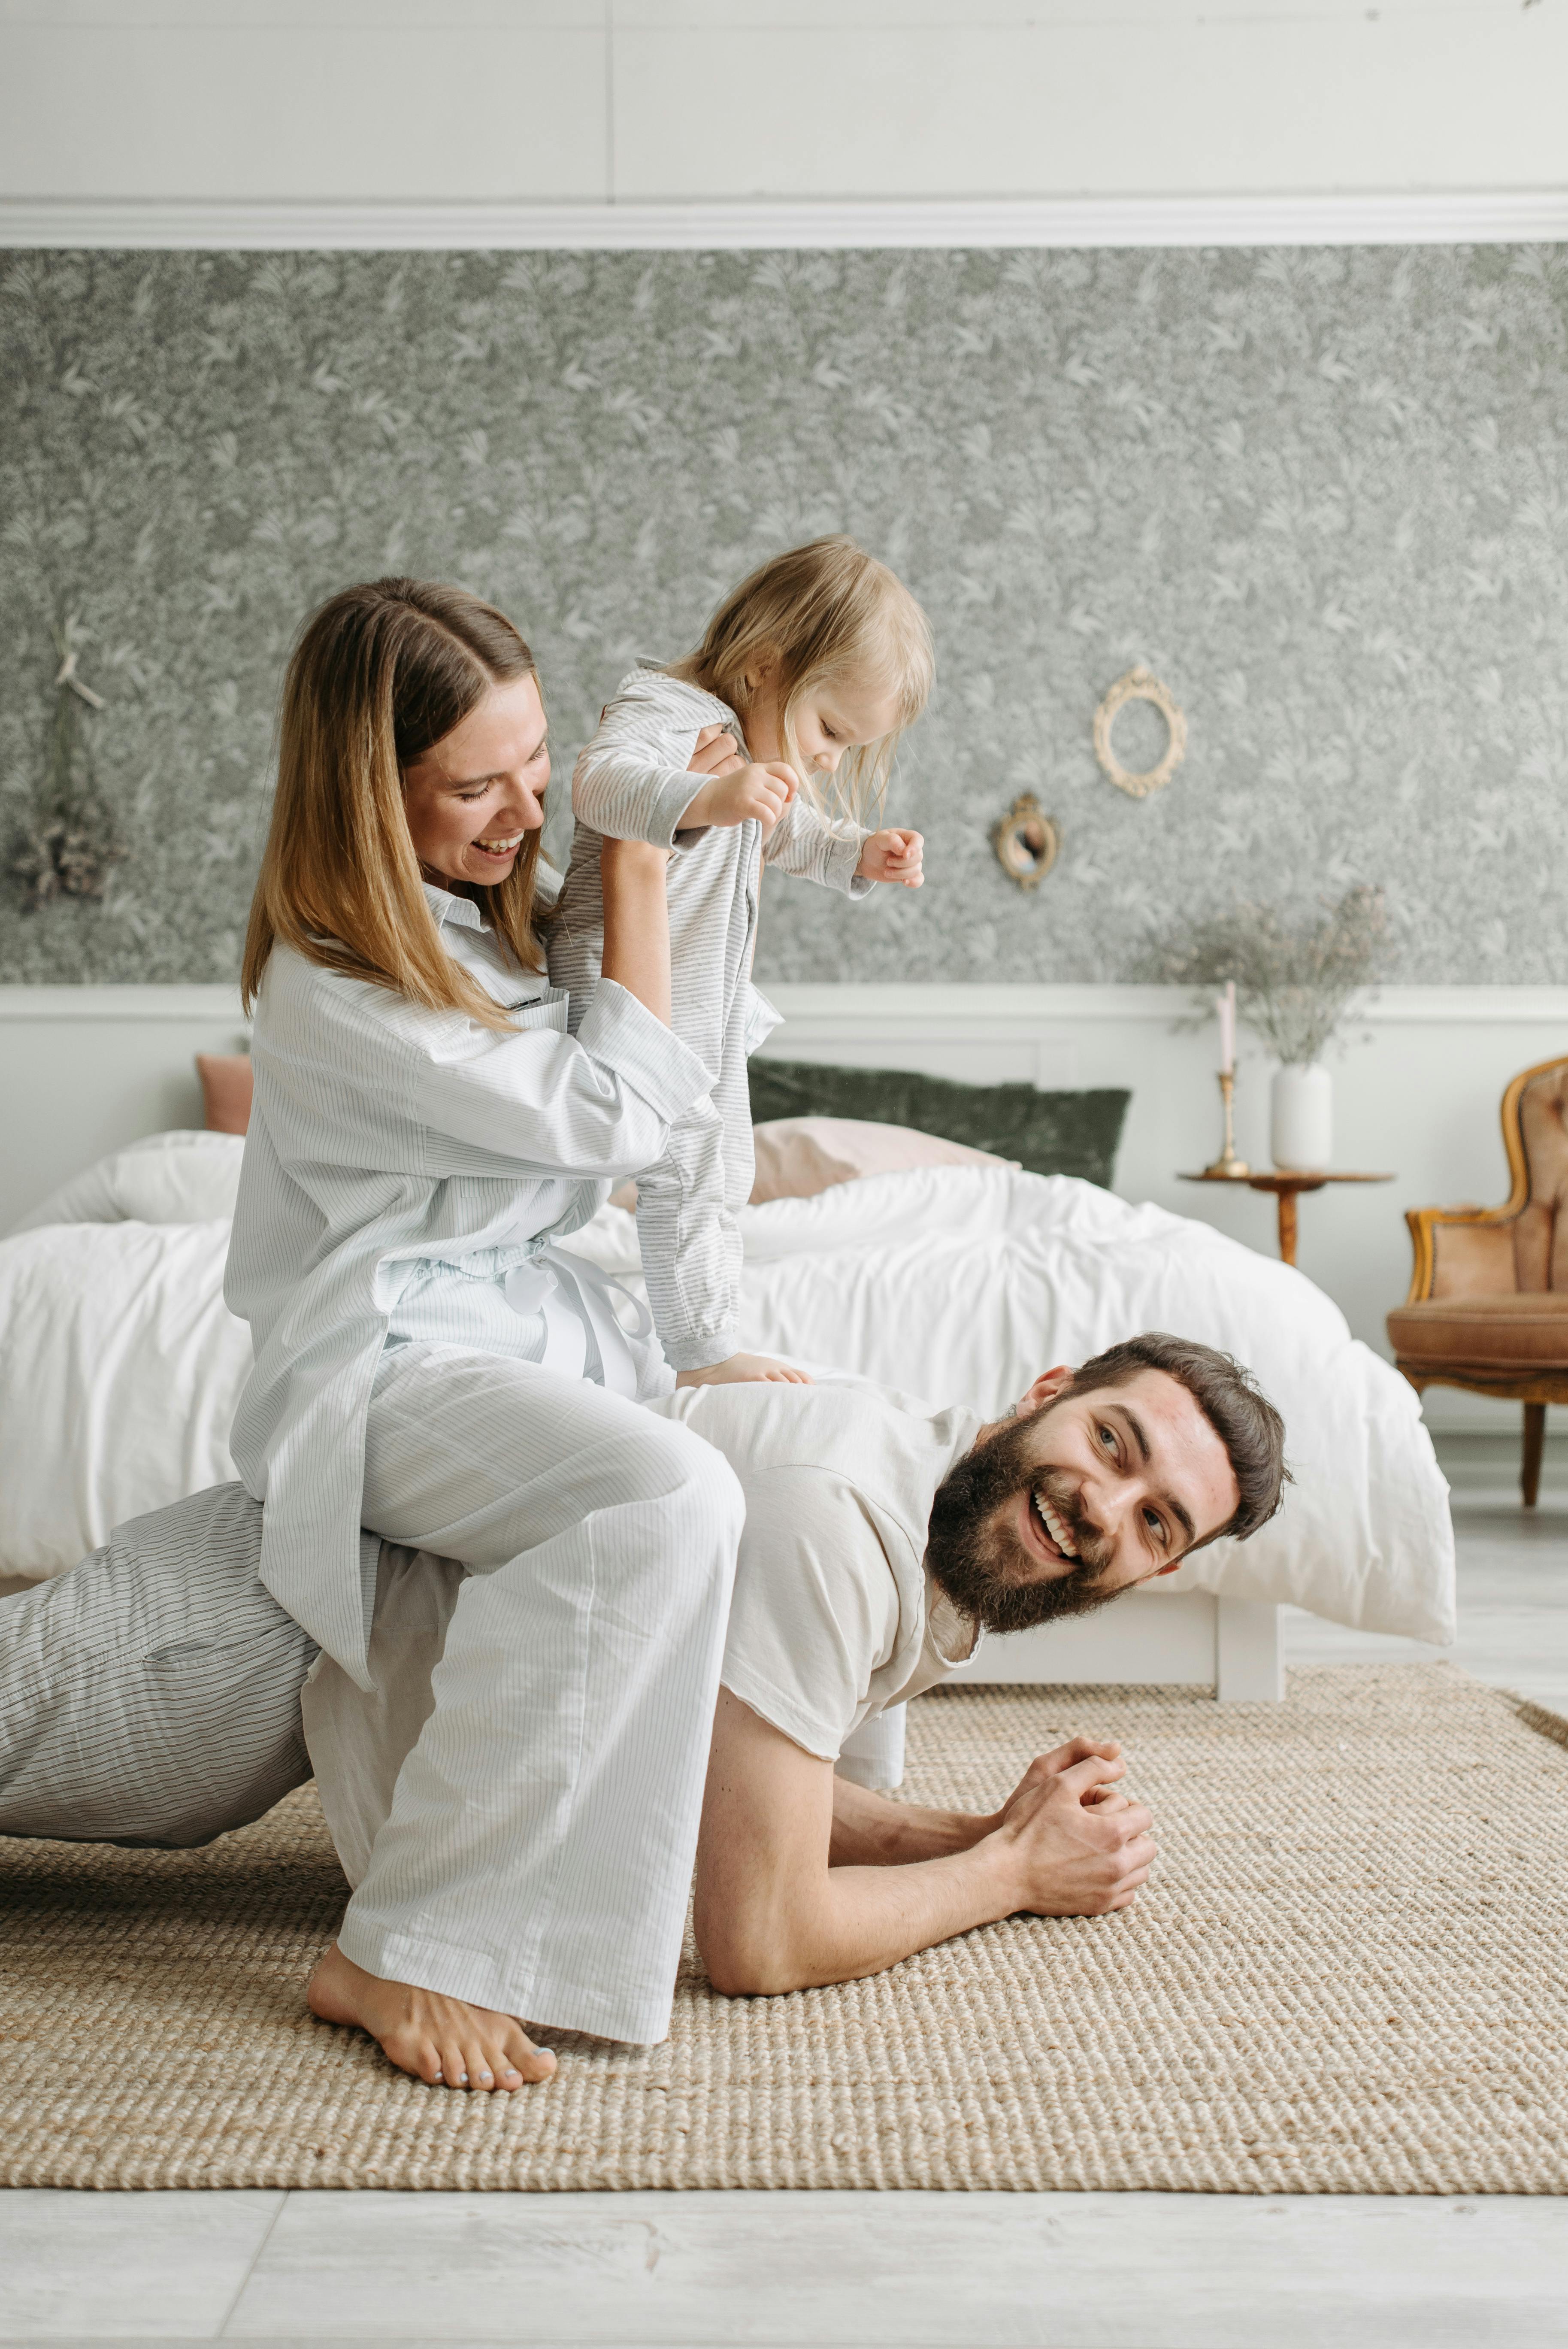 A happy family | Source: Pexels